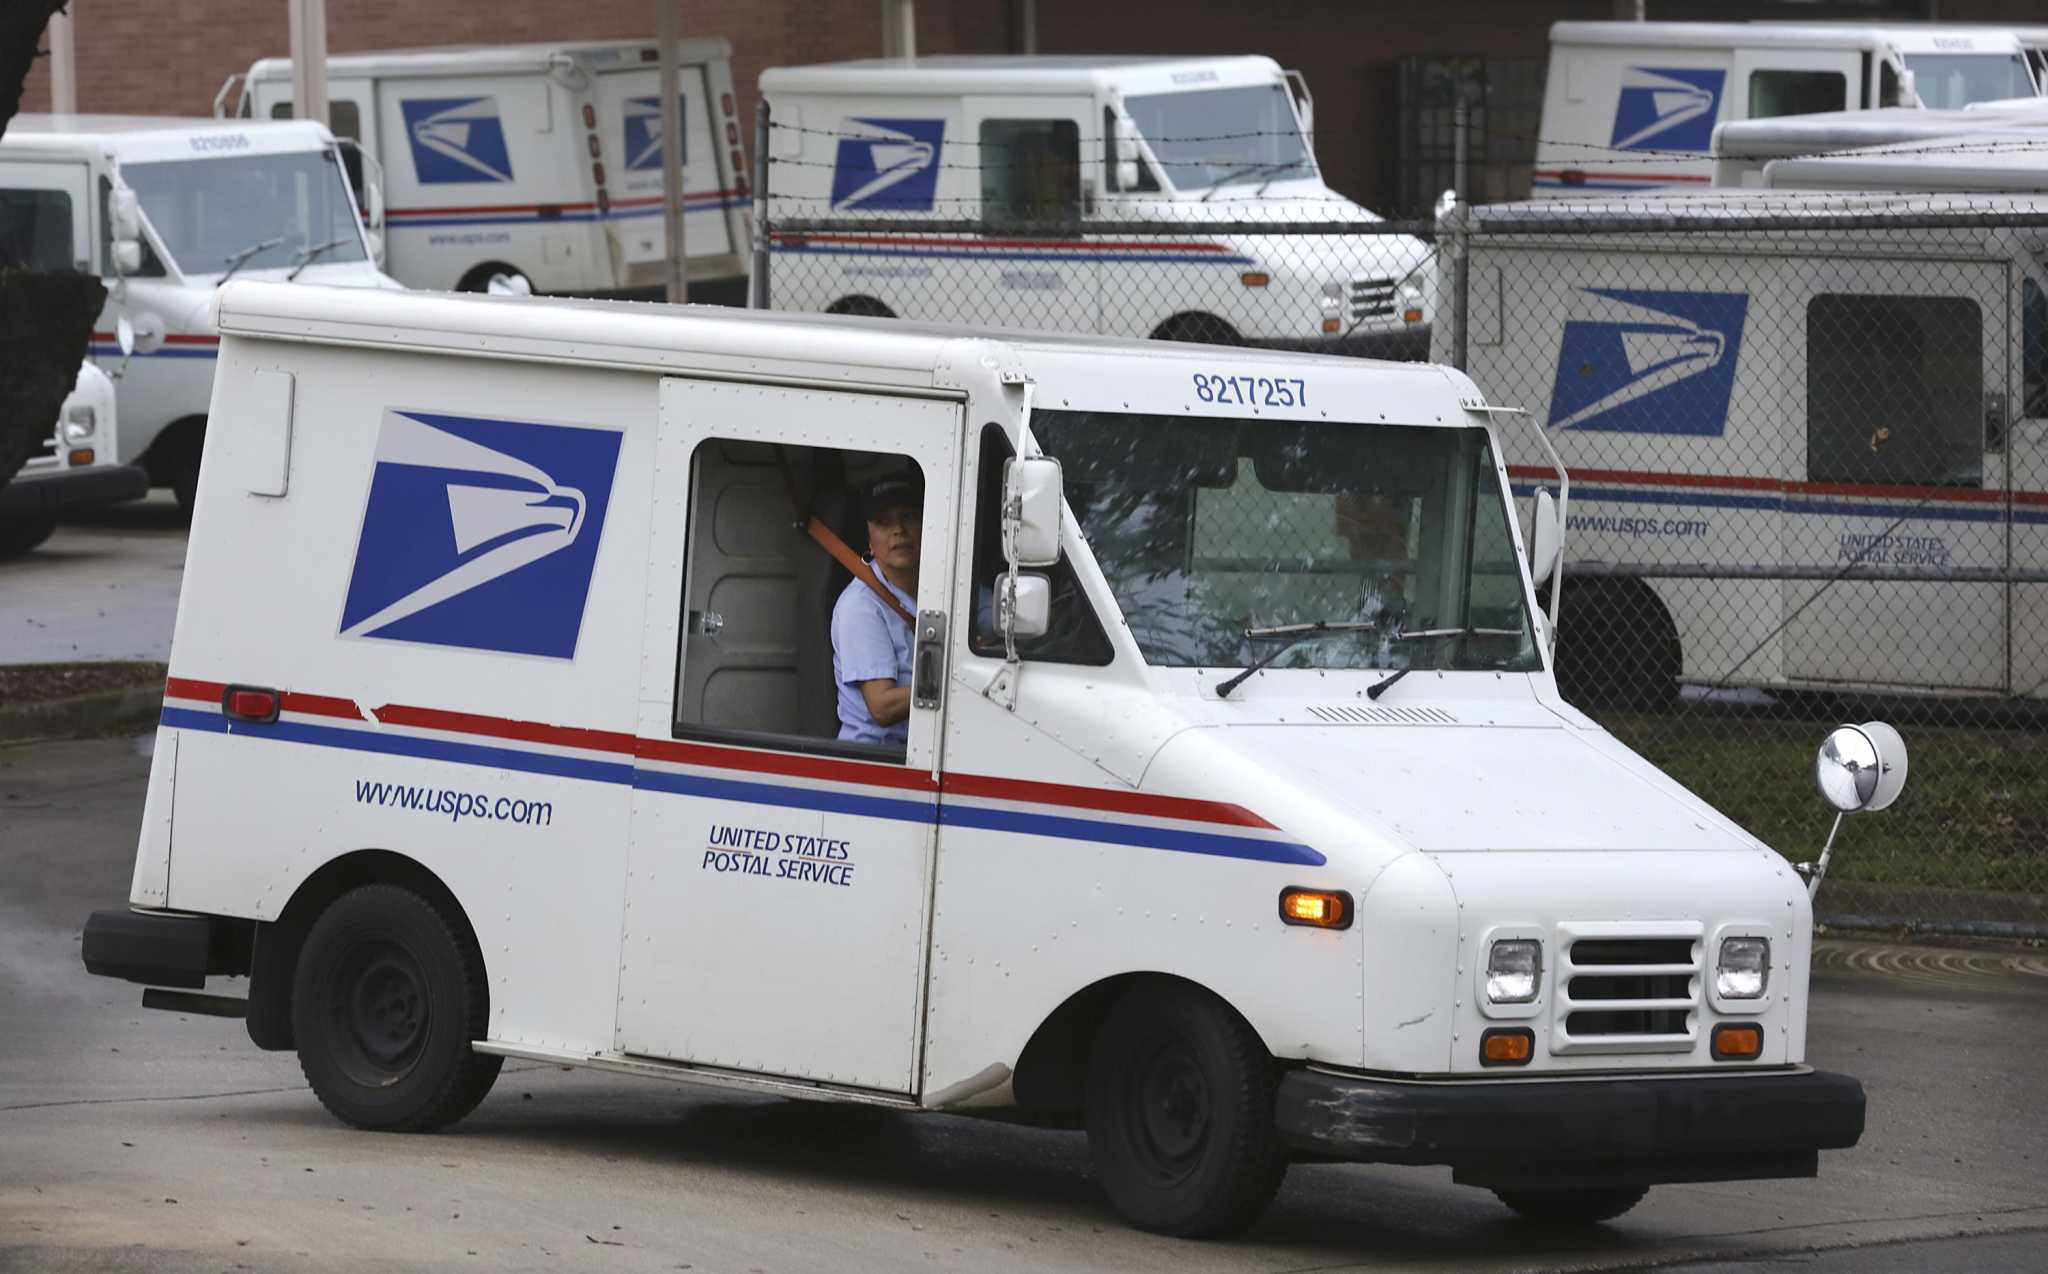 The USPS drama explained — and what it means for San Antonio